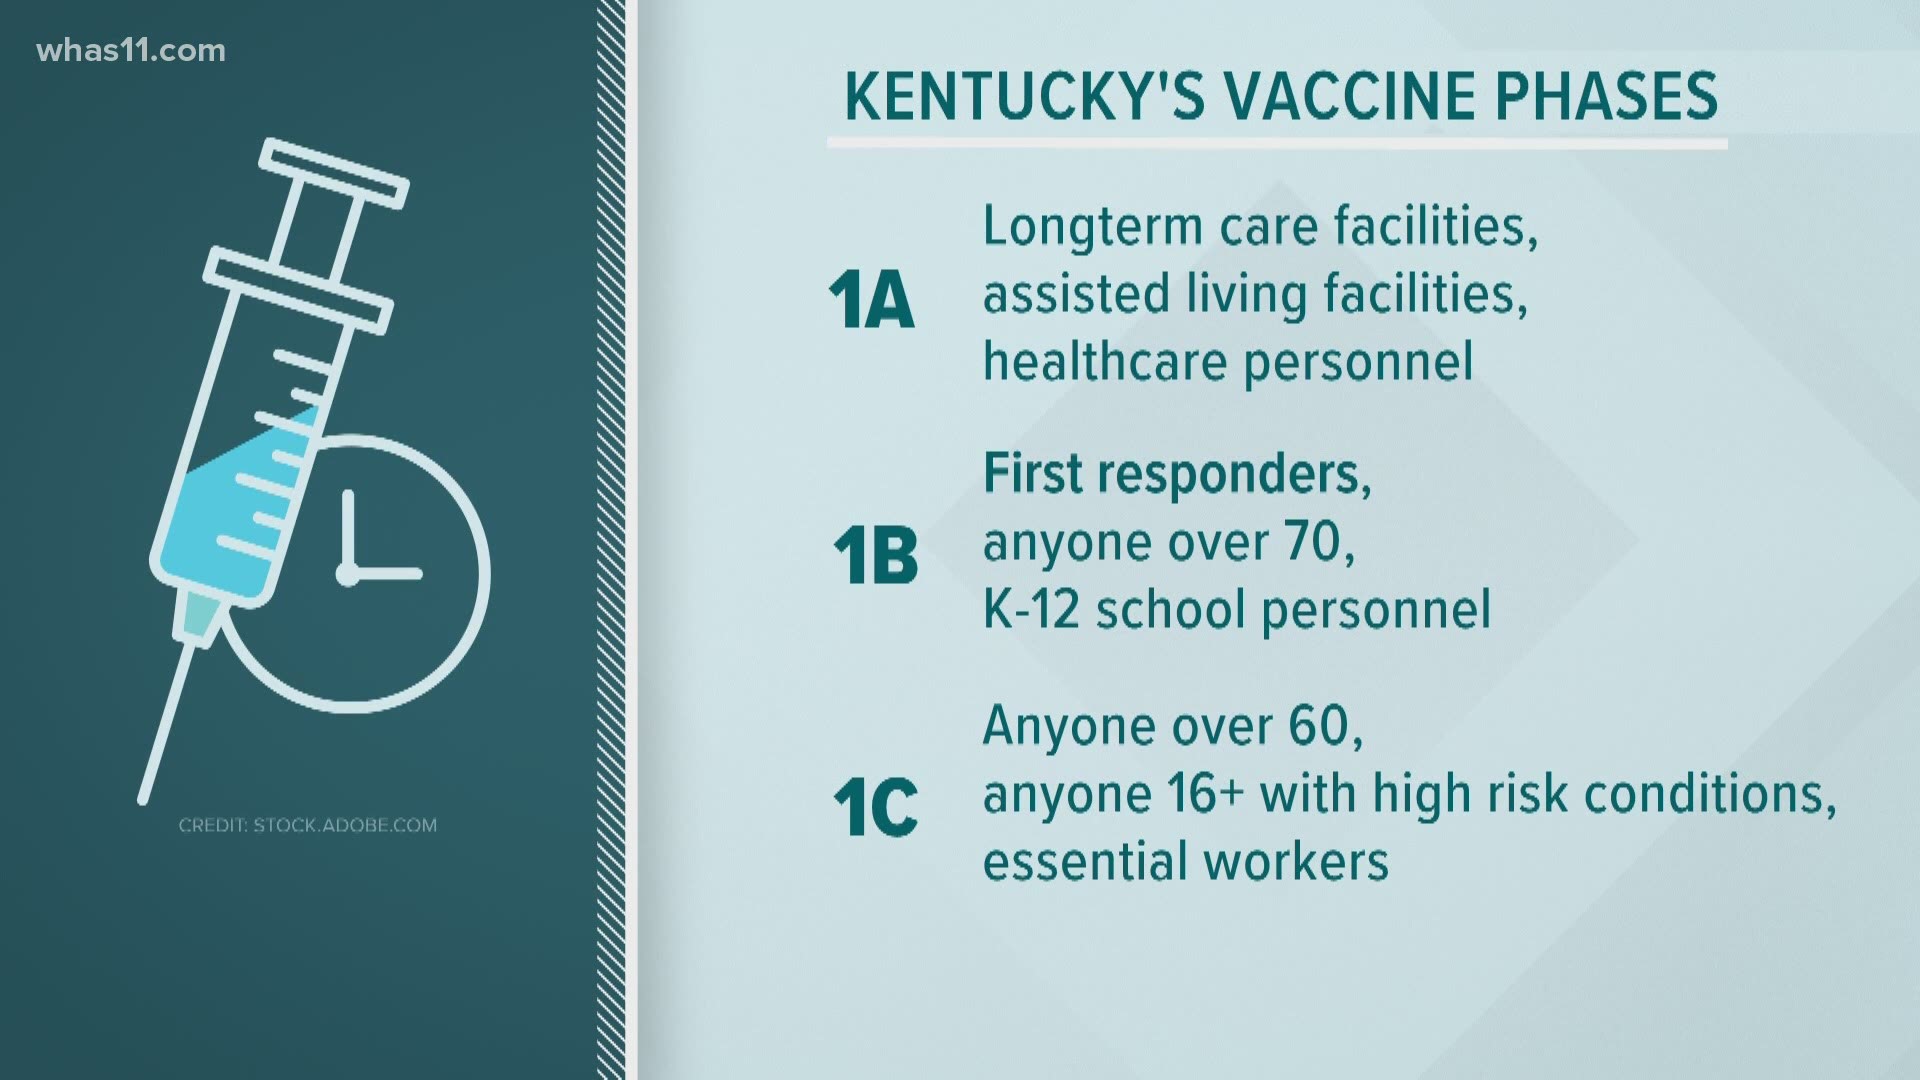 Governor Beshear outlined six phases of vaccine distribution in Kentucky.